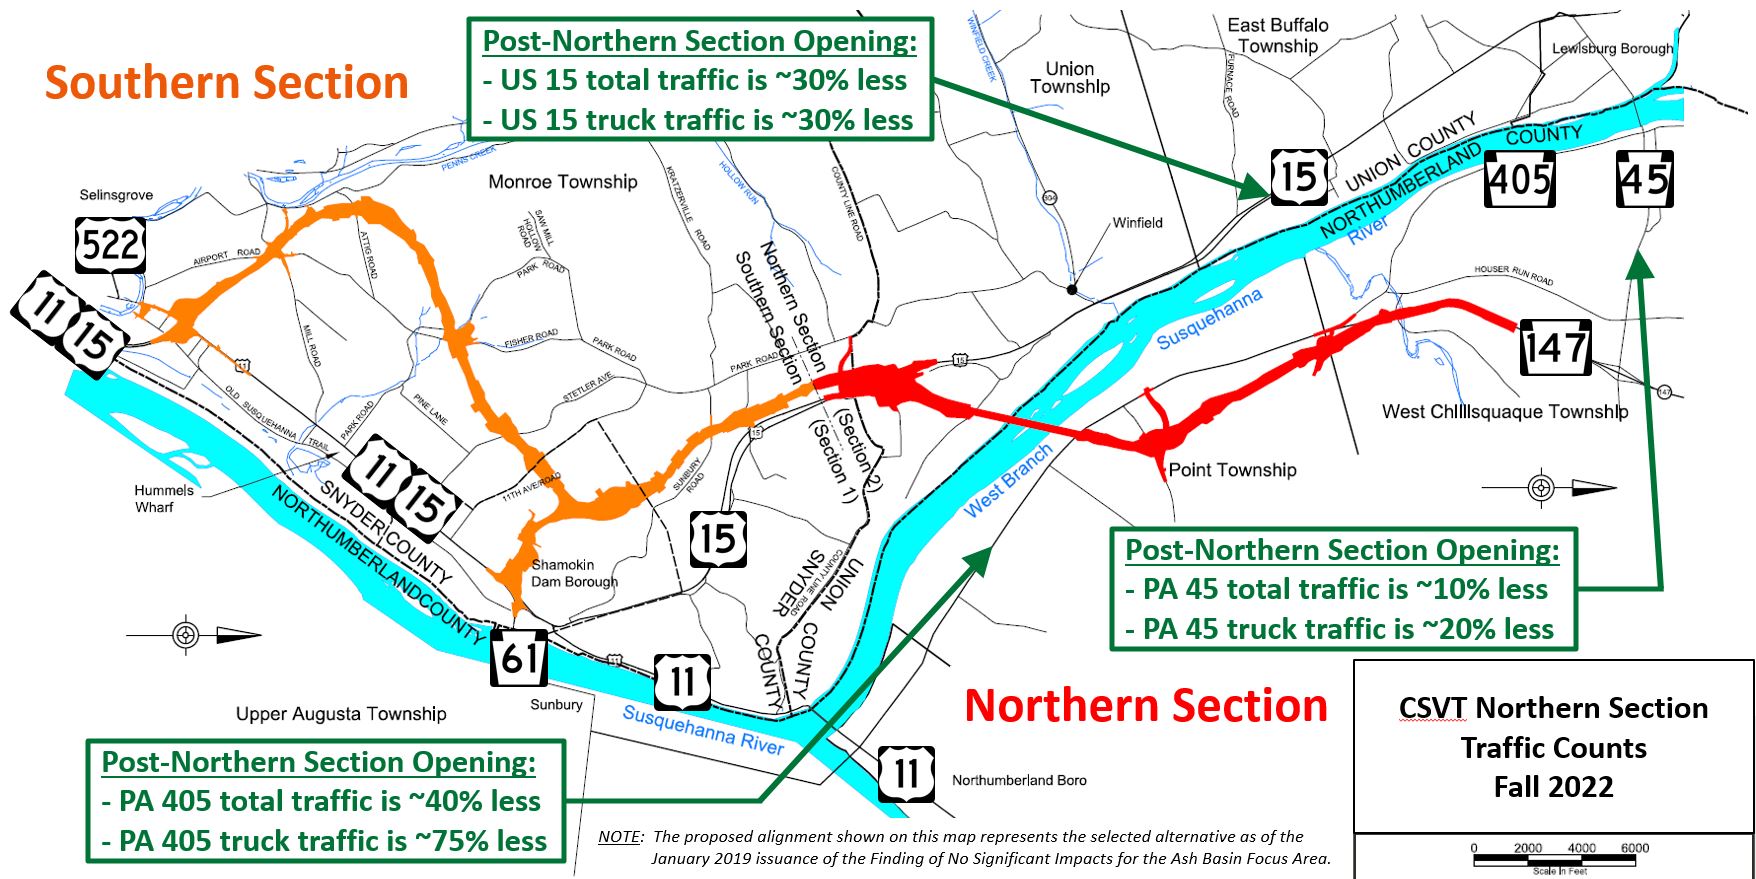 CSVT Northern Section Traffic Counts (Fall 2022).JPG